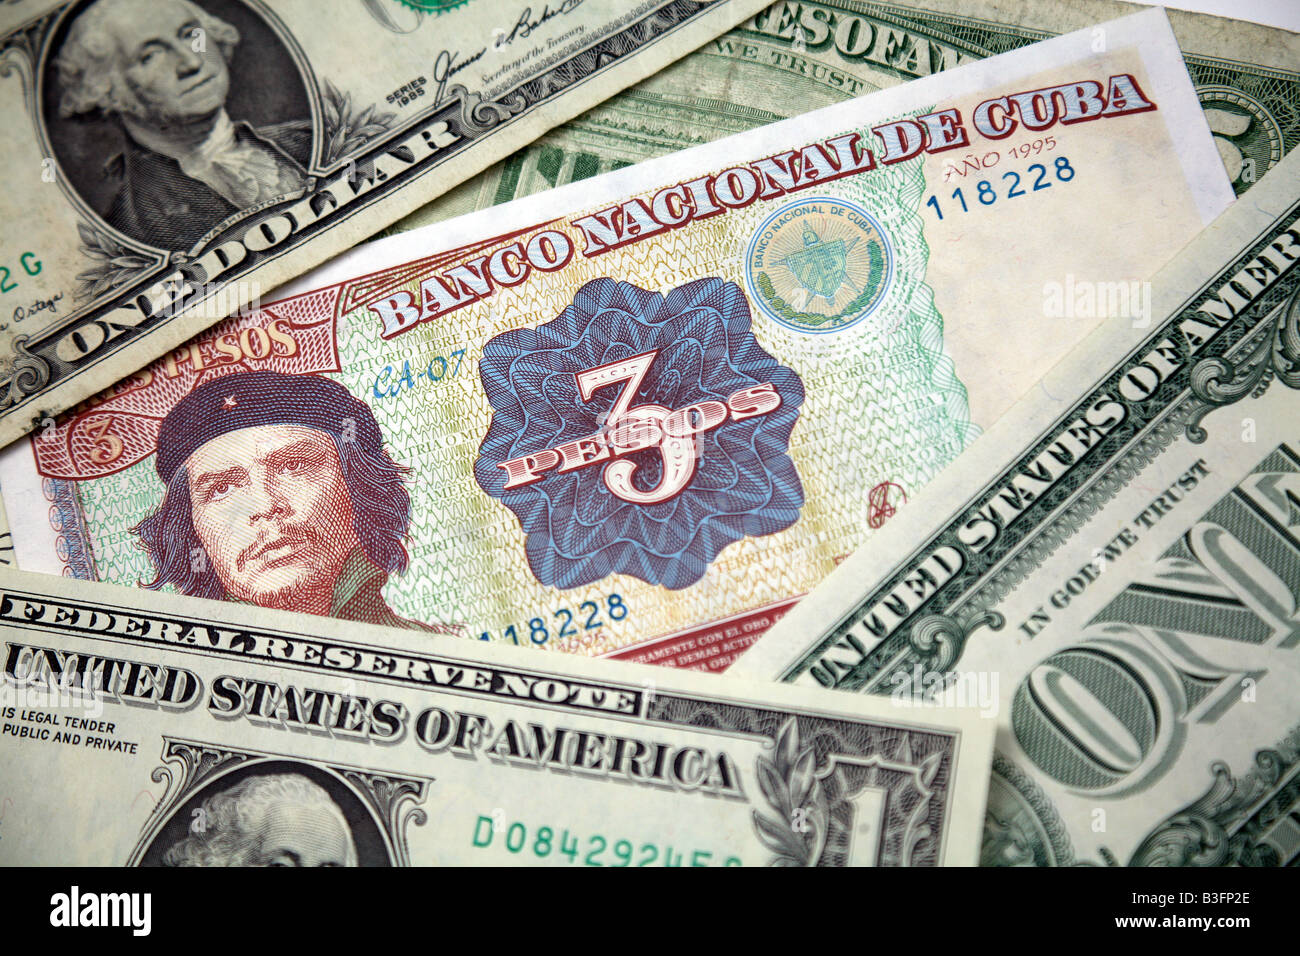 Che Guevara on a Cuban banknote with United States Dollars Stock Photo